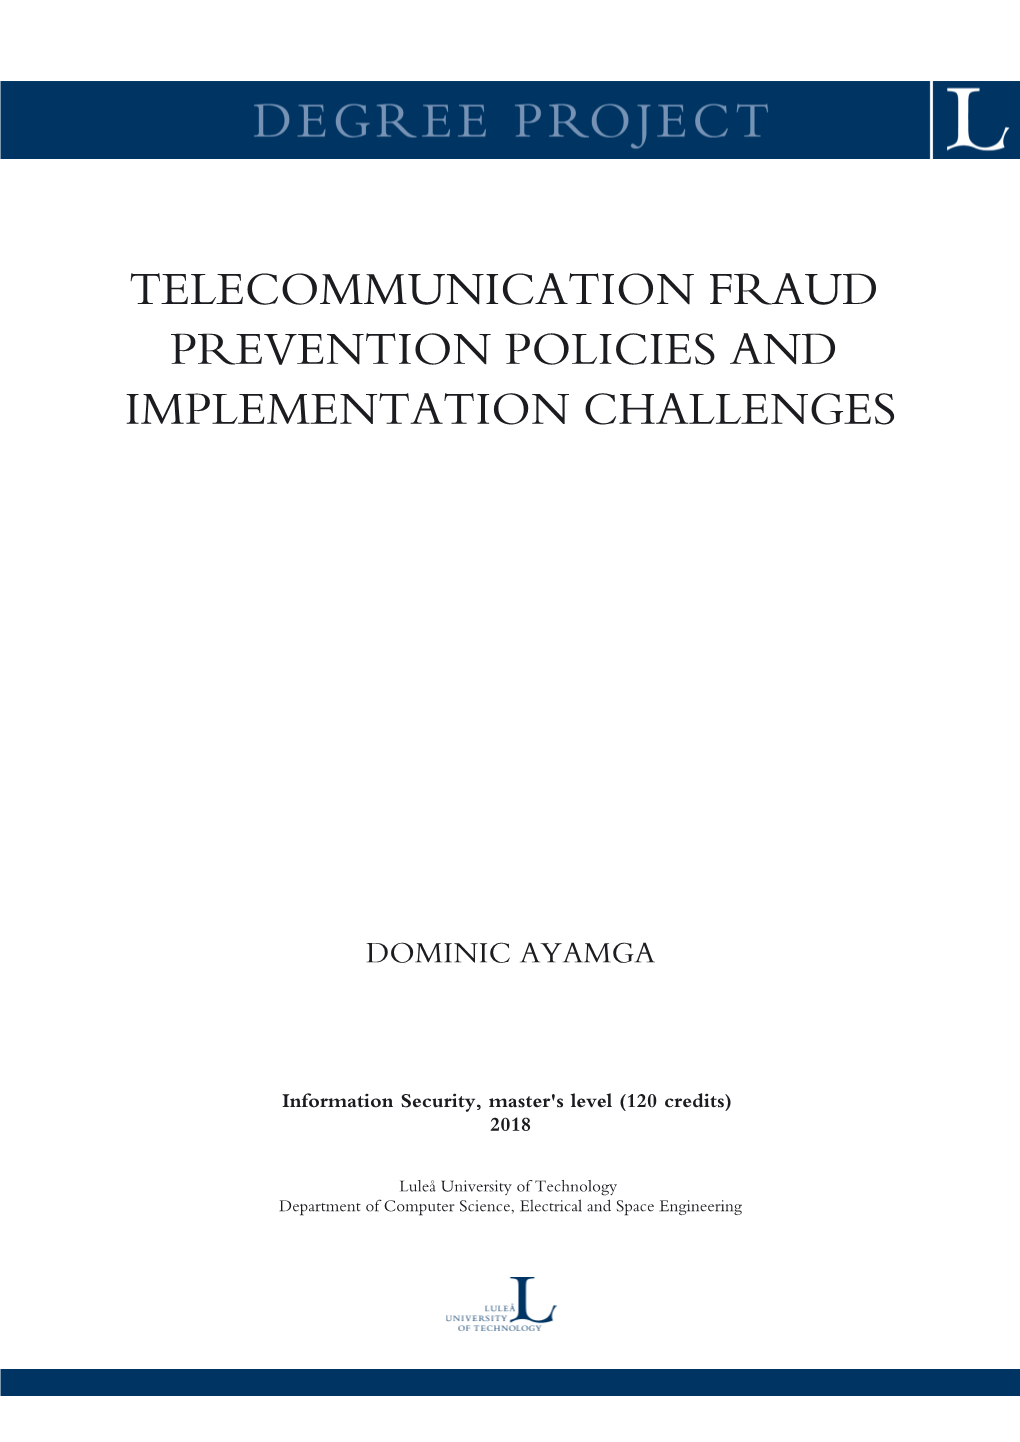 Telecommunication Fraud Prevention Policies and Implementation Challenges